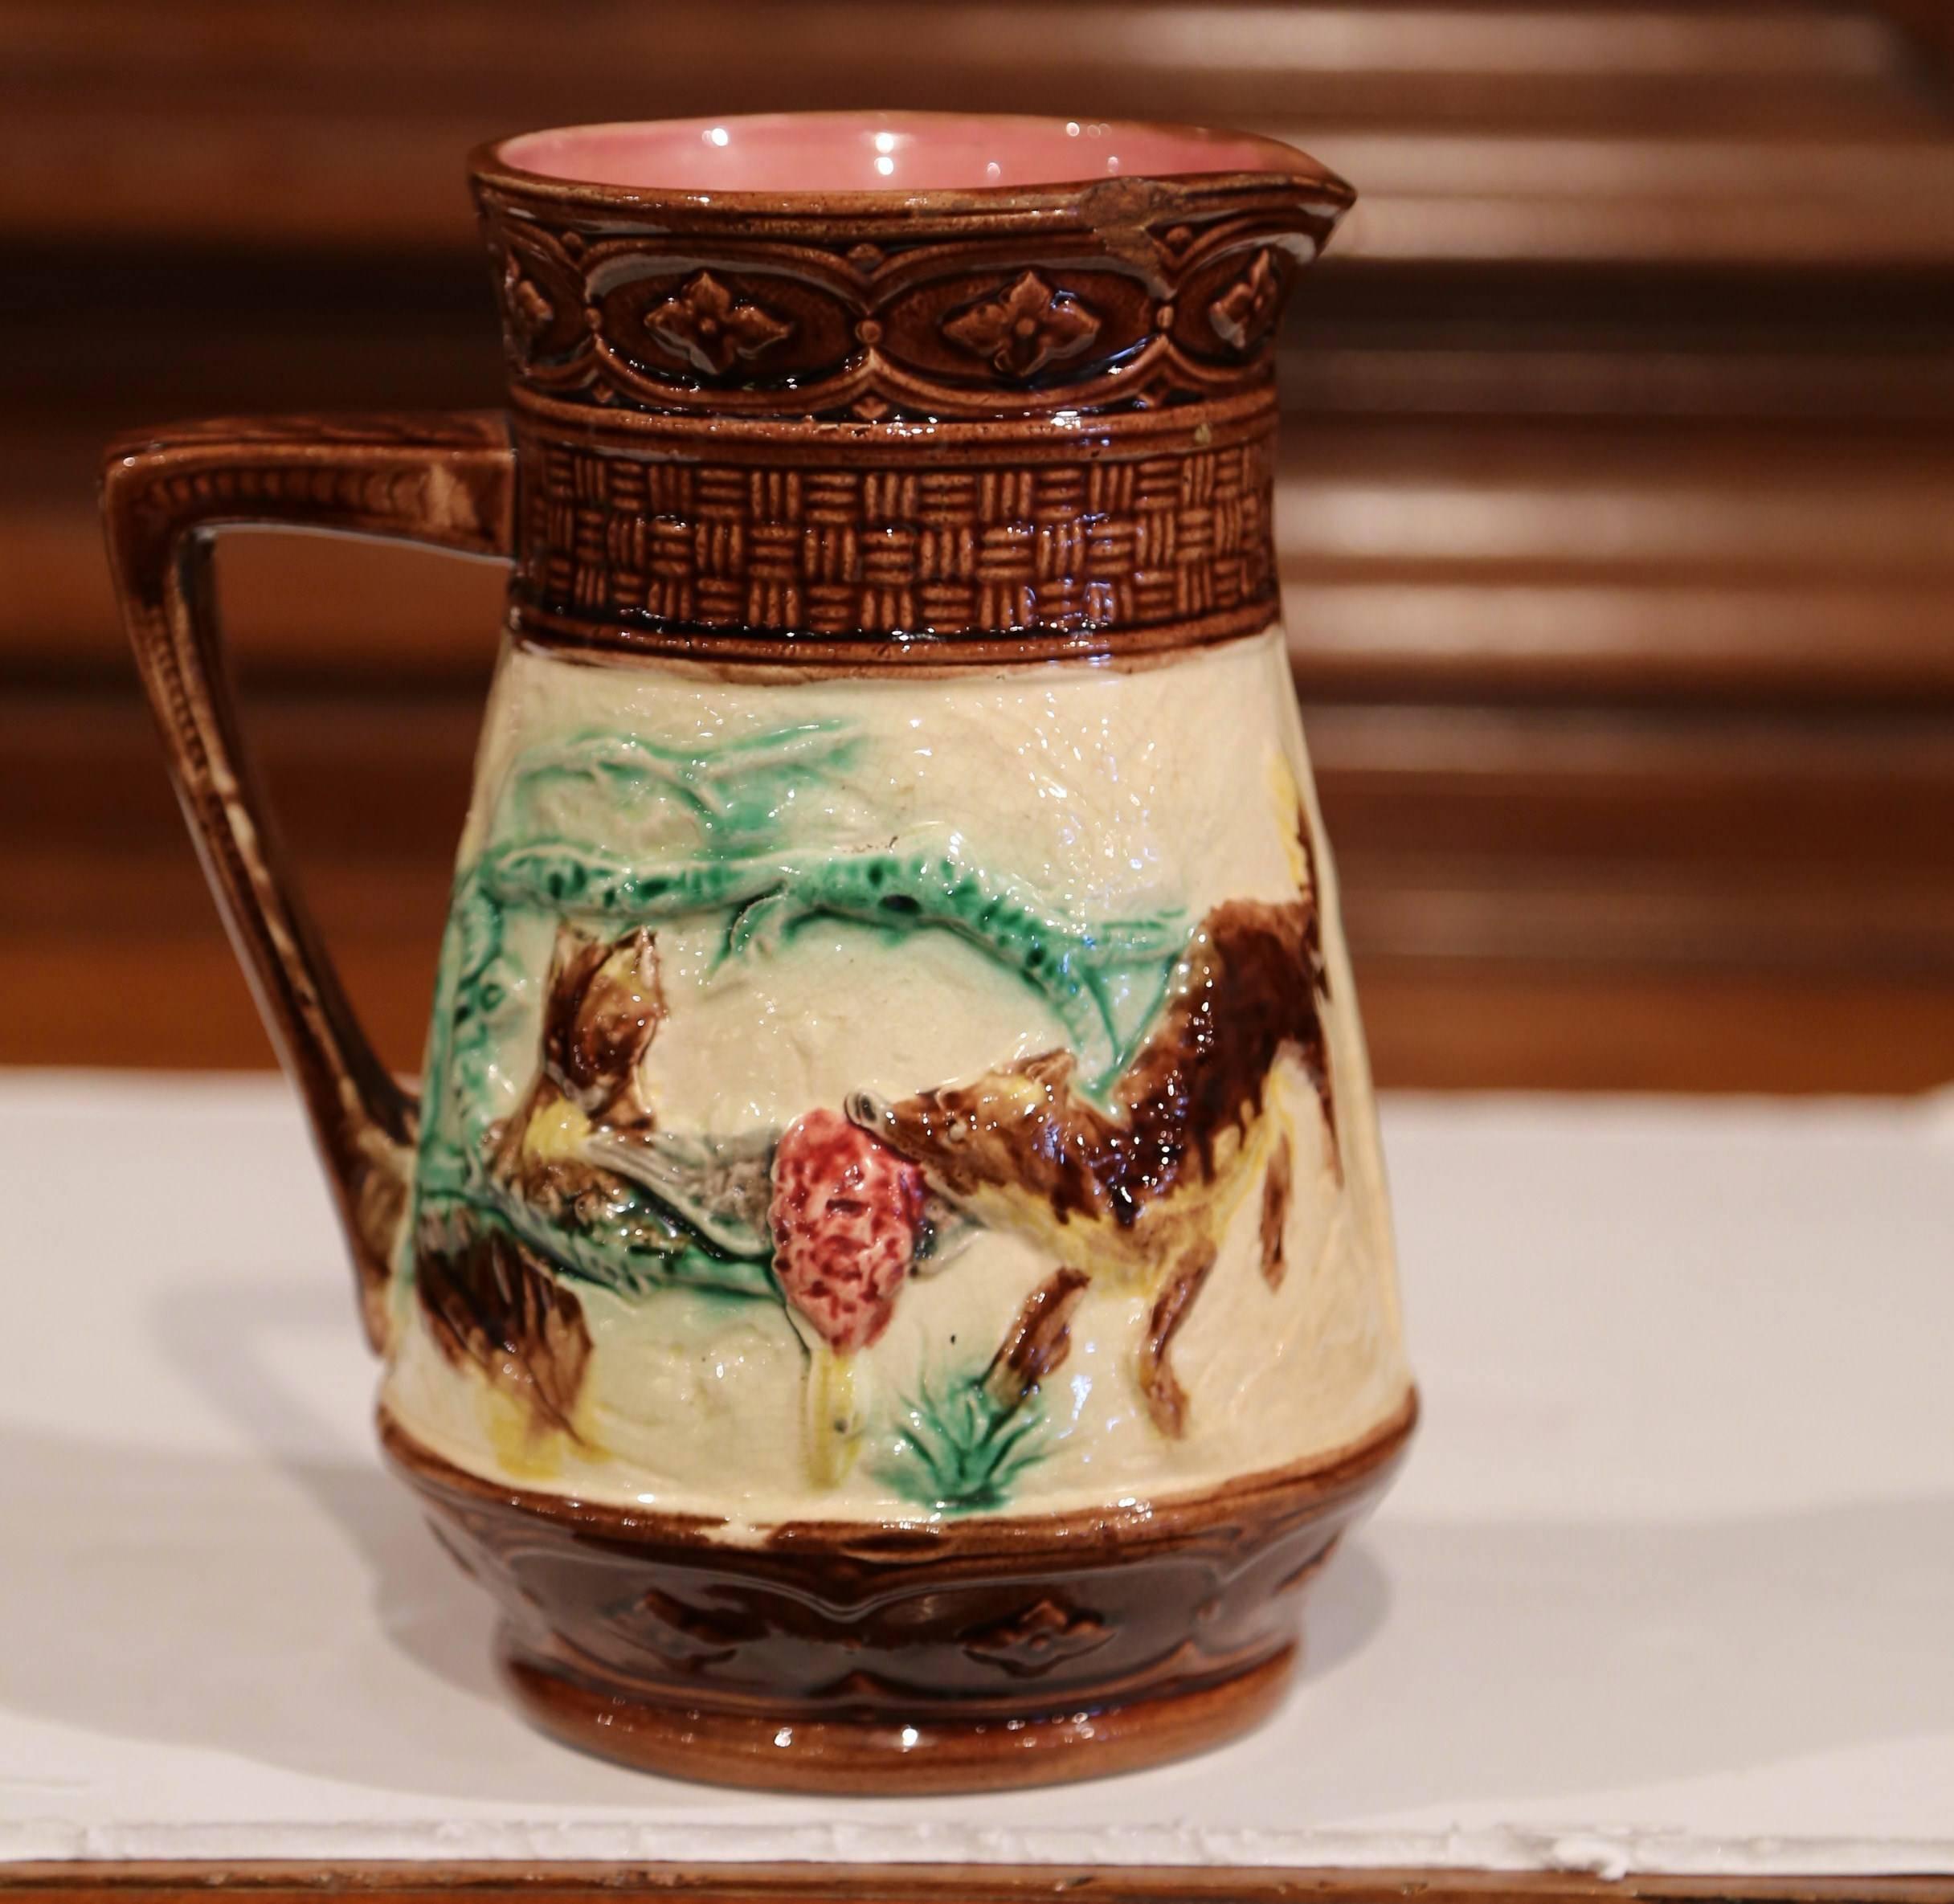 Crafted in France, circa 1880, this interesting antique pitcher would make a charming addition to your kitchen or dining room. The artful, hand painted, Majolica pitcher is embellished with a hunting scene, which shows a dog in high relief holding a